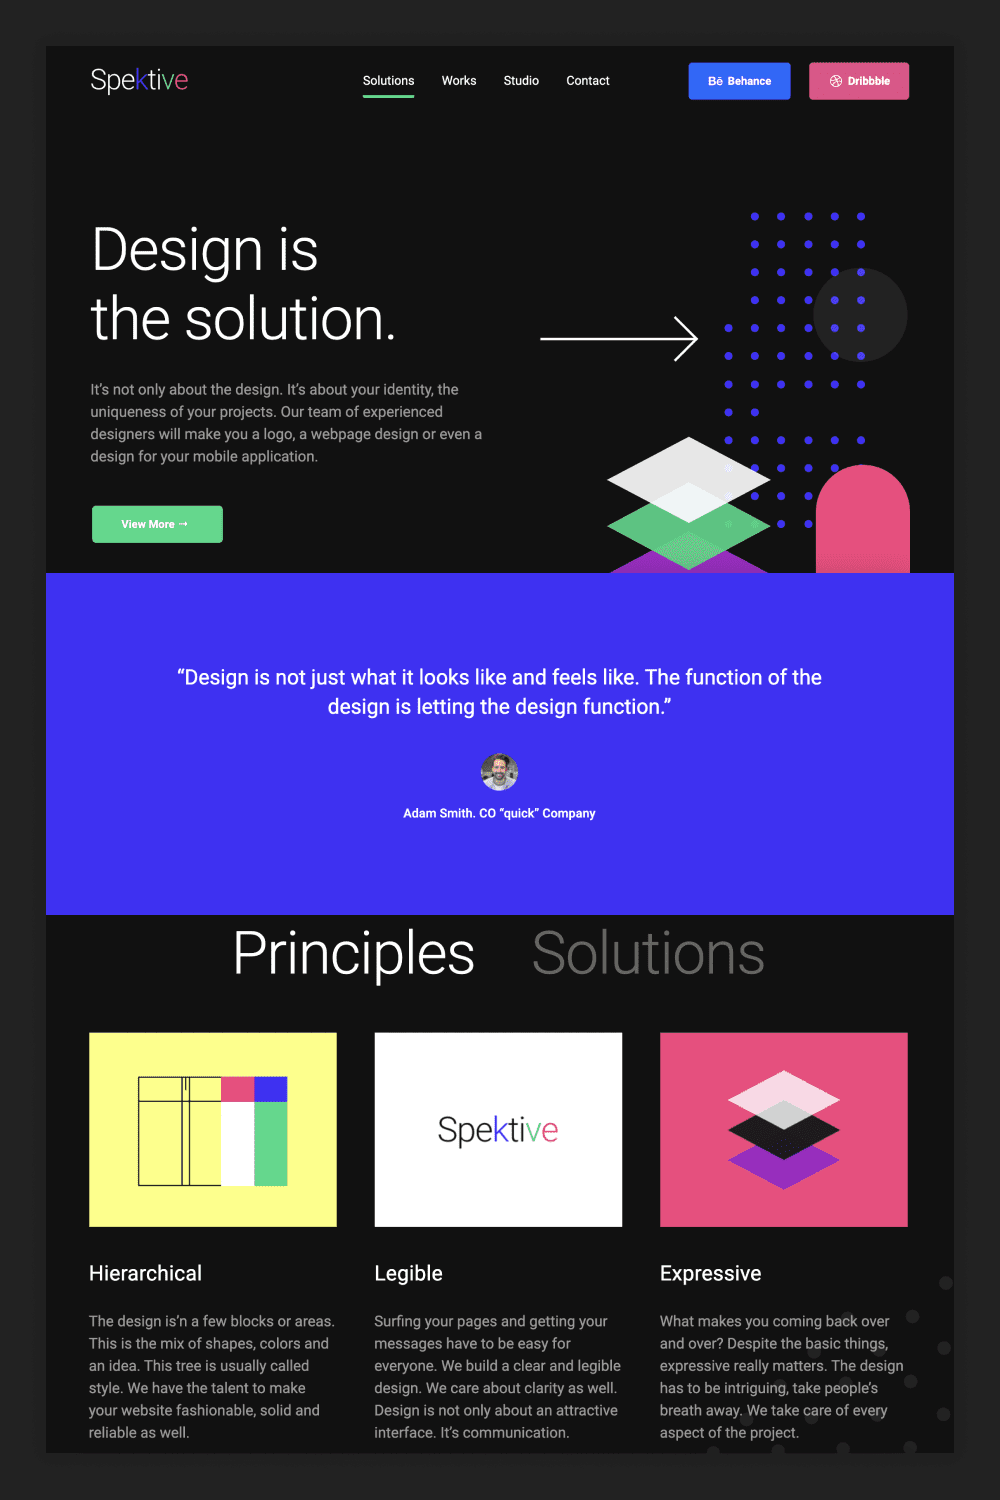 Screenshot of the main page of the site with clear geometric shapes.